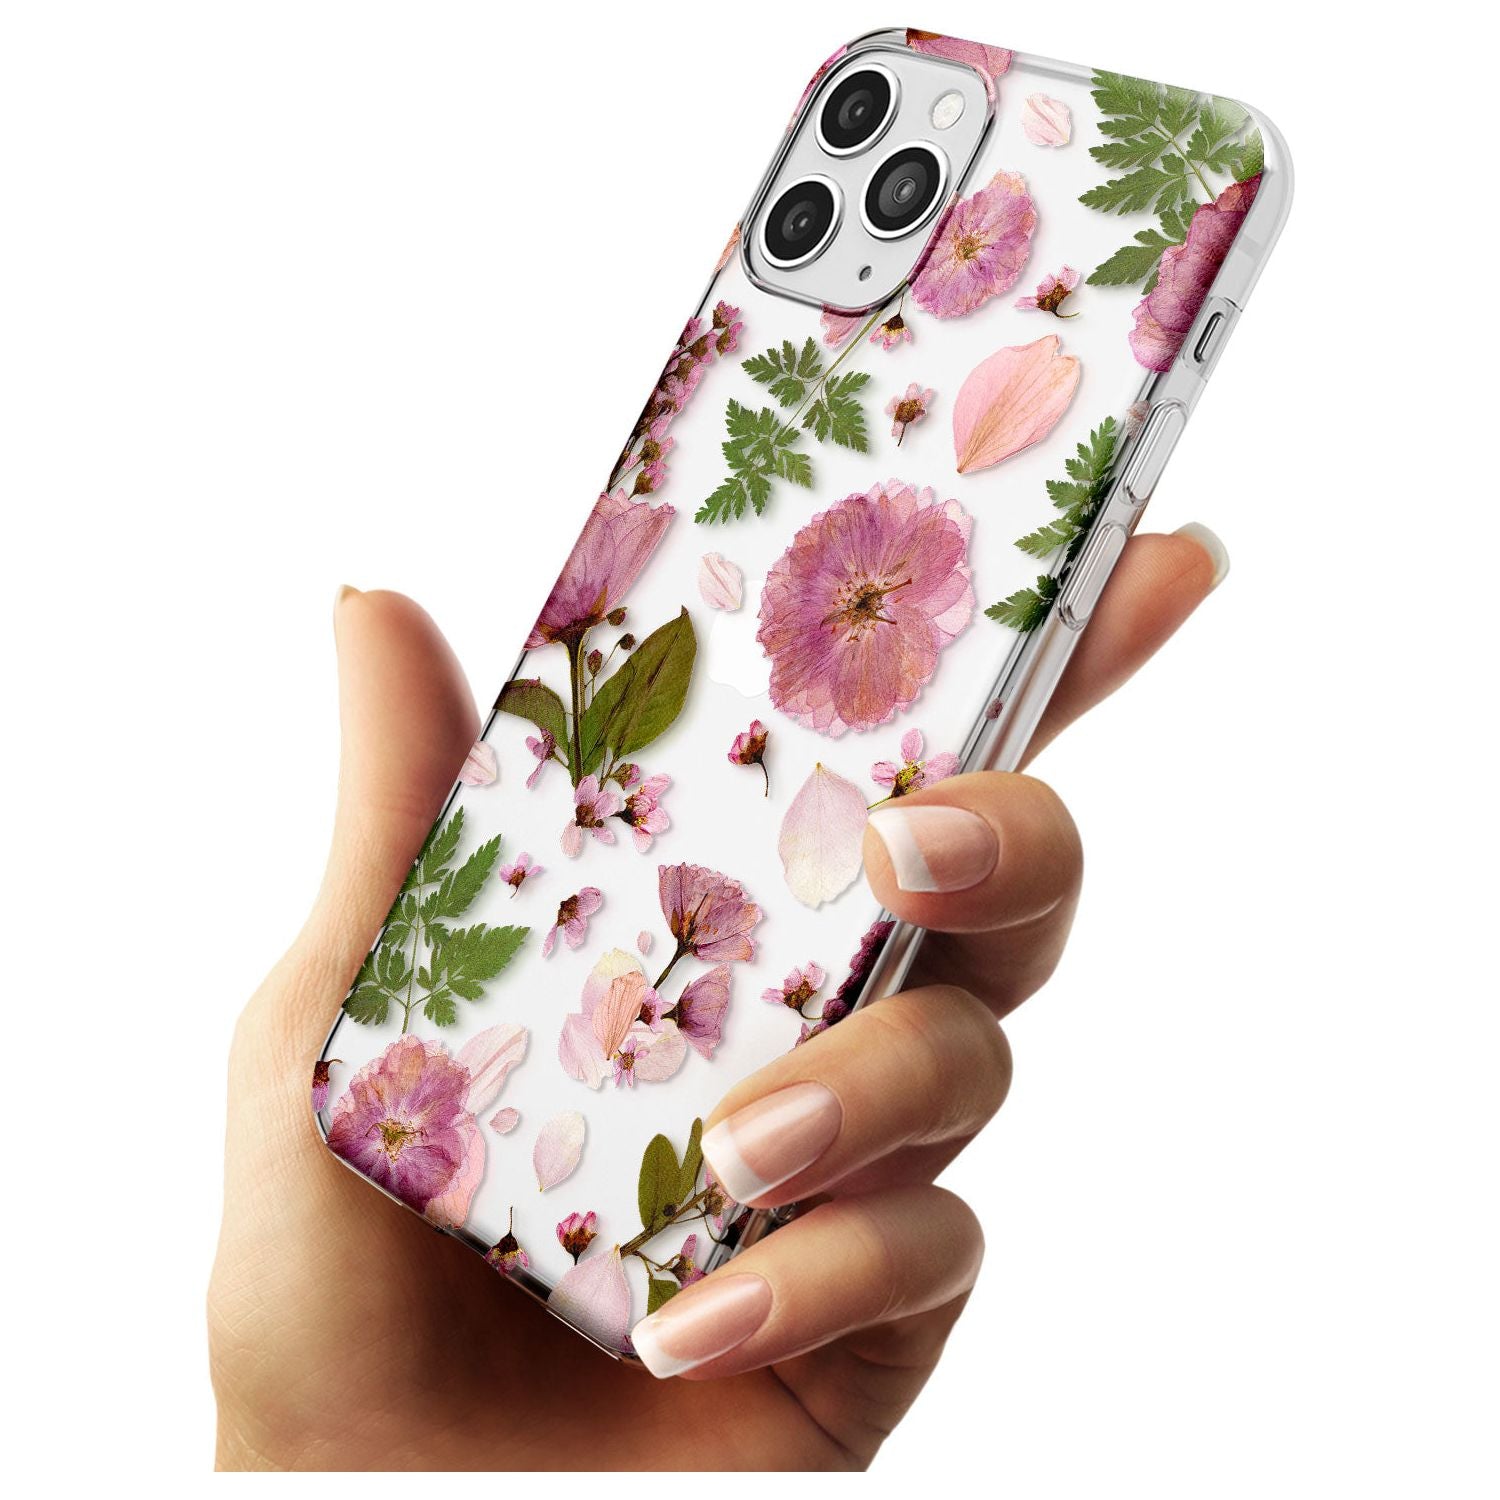 Natural Arrangement of Flowers & Leaves Design Slim TPU Phone Case for iPhone 11 Pro Max